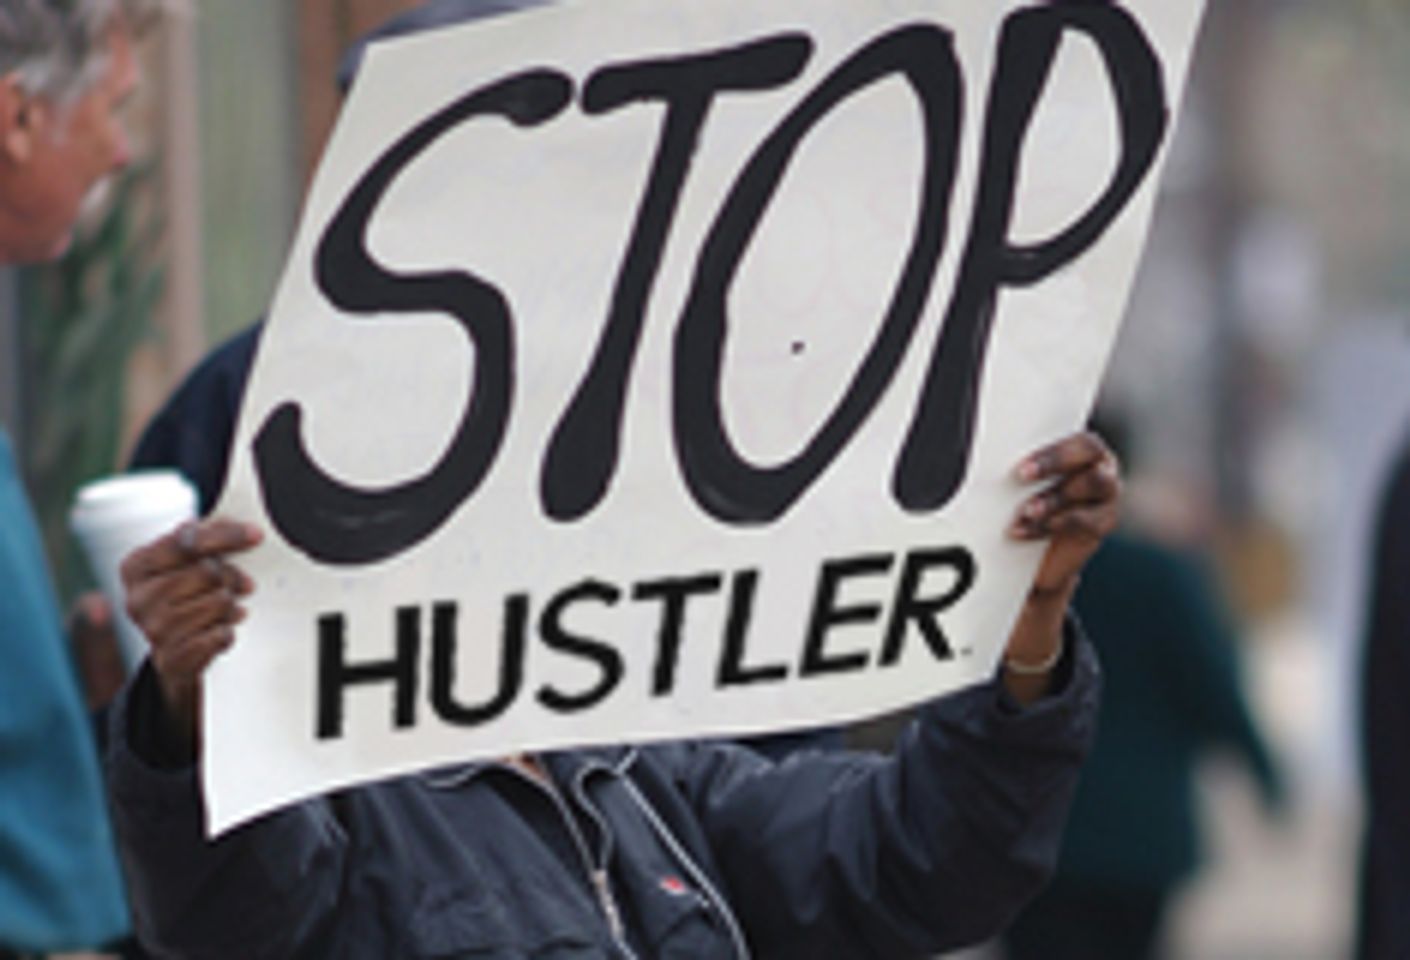 Lincoln Park Citizens Protest Deal With Hustler Club